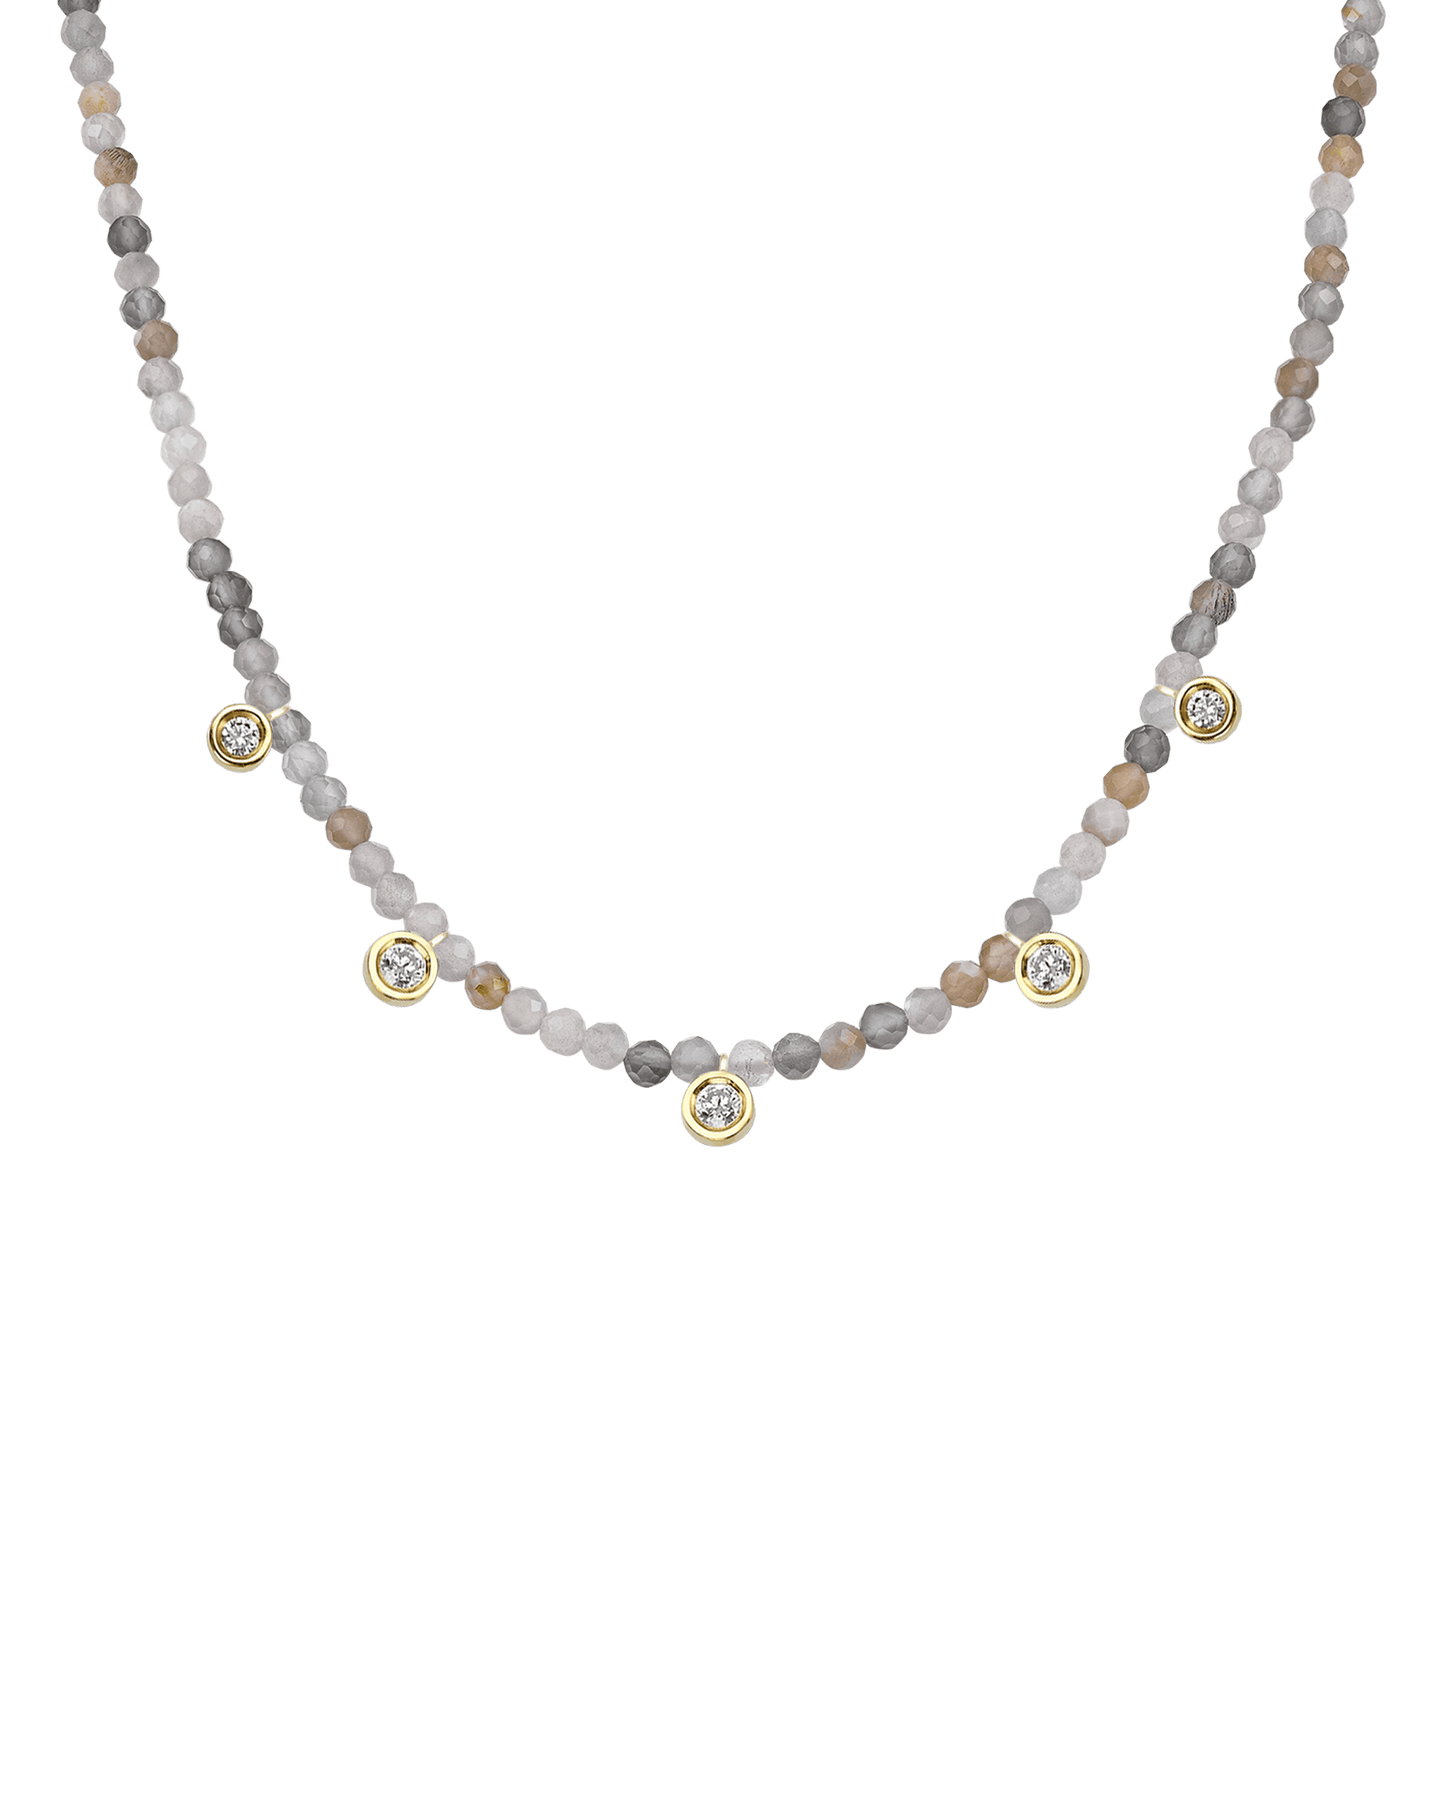 Apatite Gemstone & Five diamonds Necklace - 14K White Gold Necklaces magal-dev Natural Moonstone 14" - Collar 